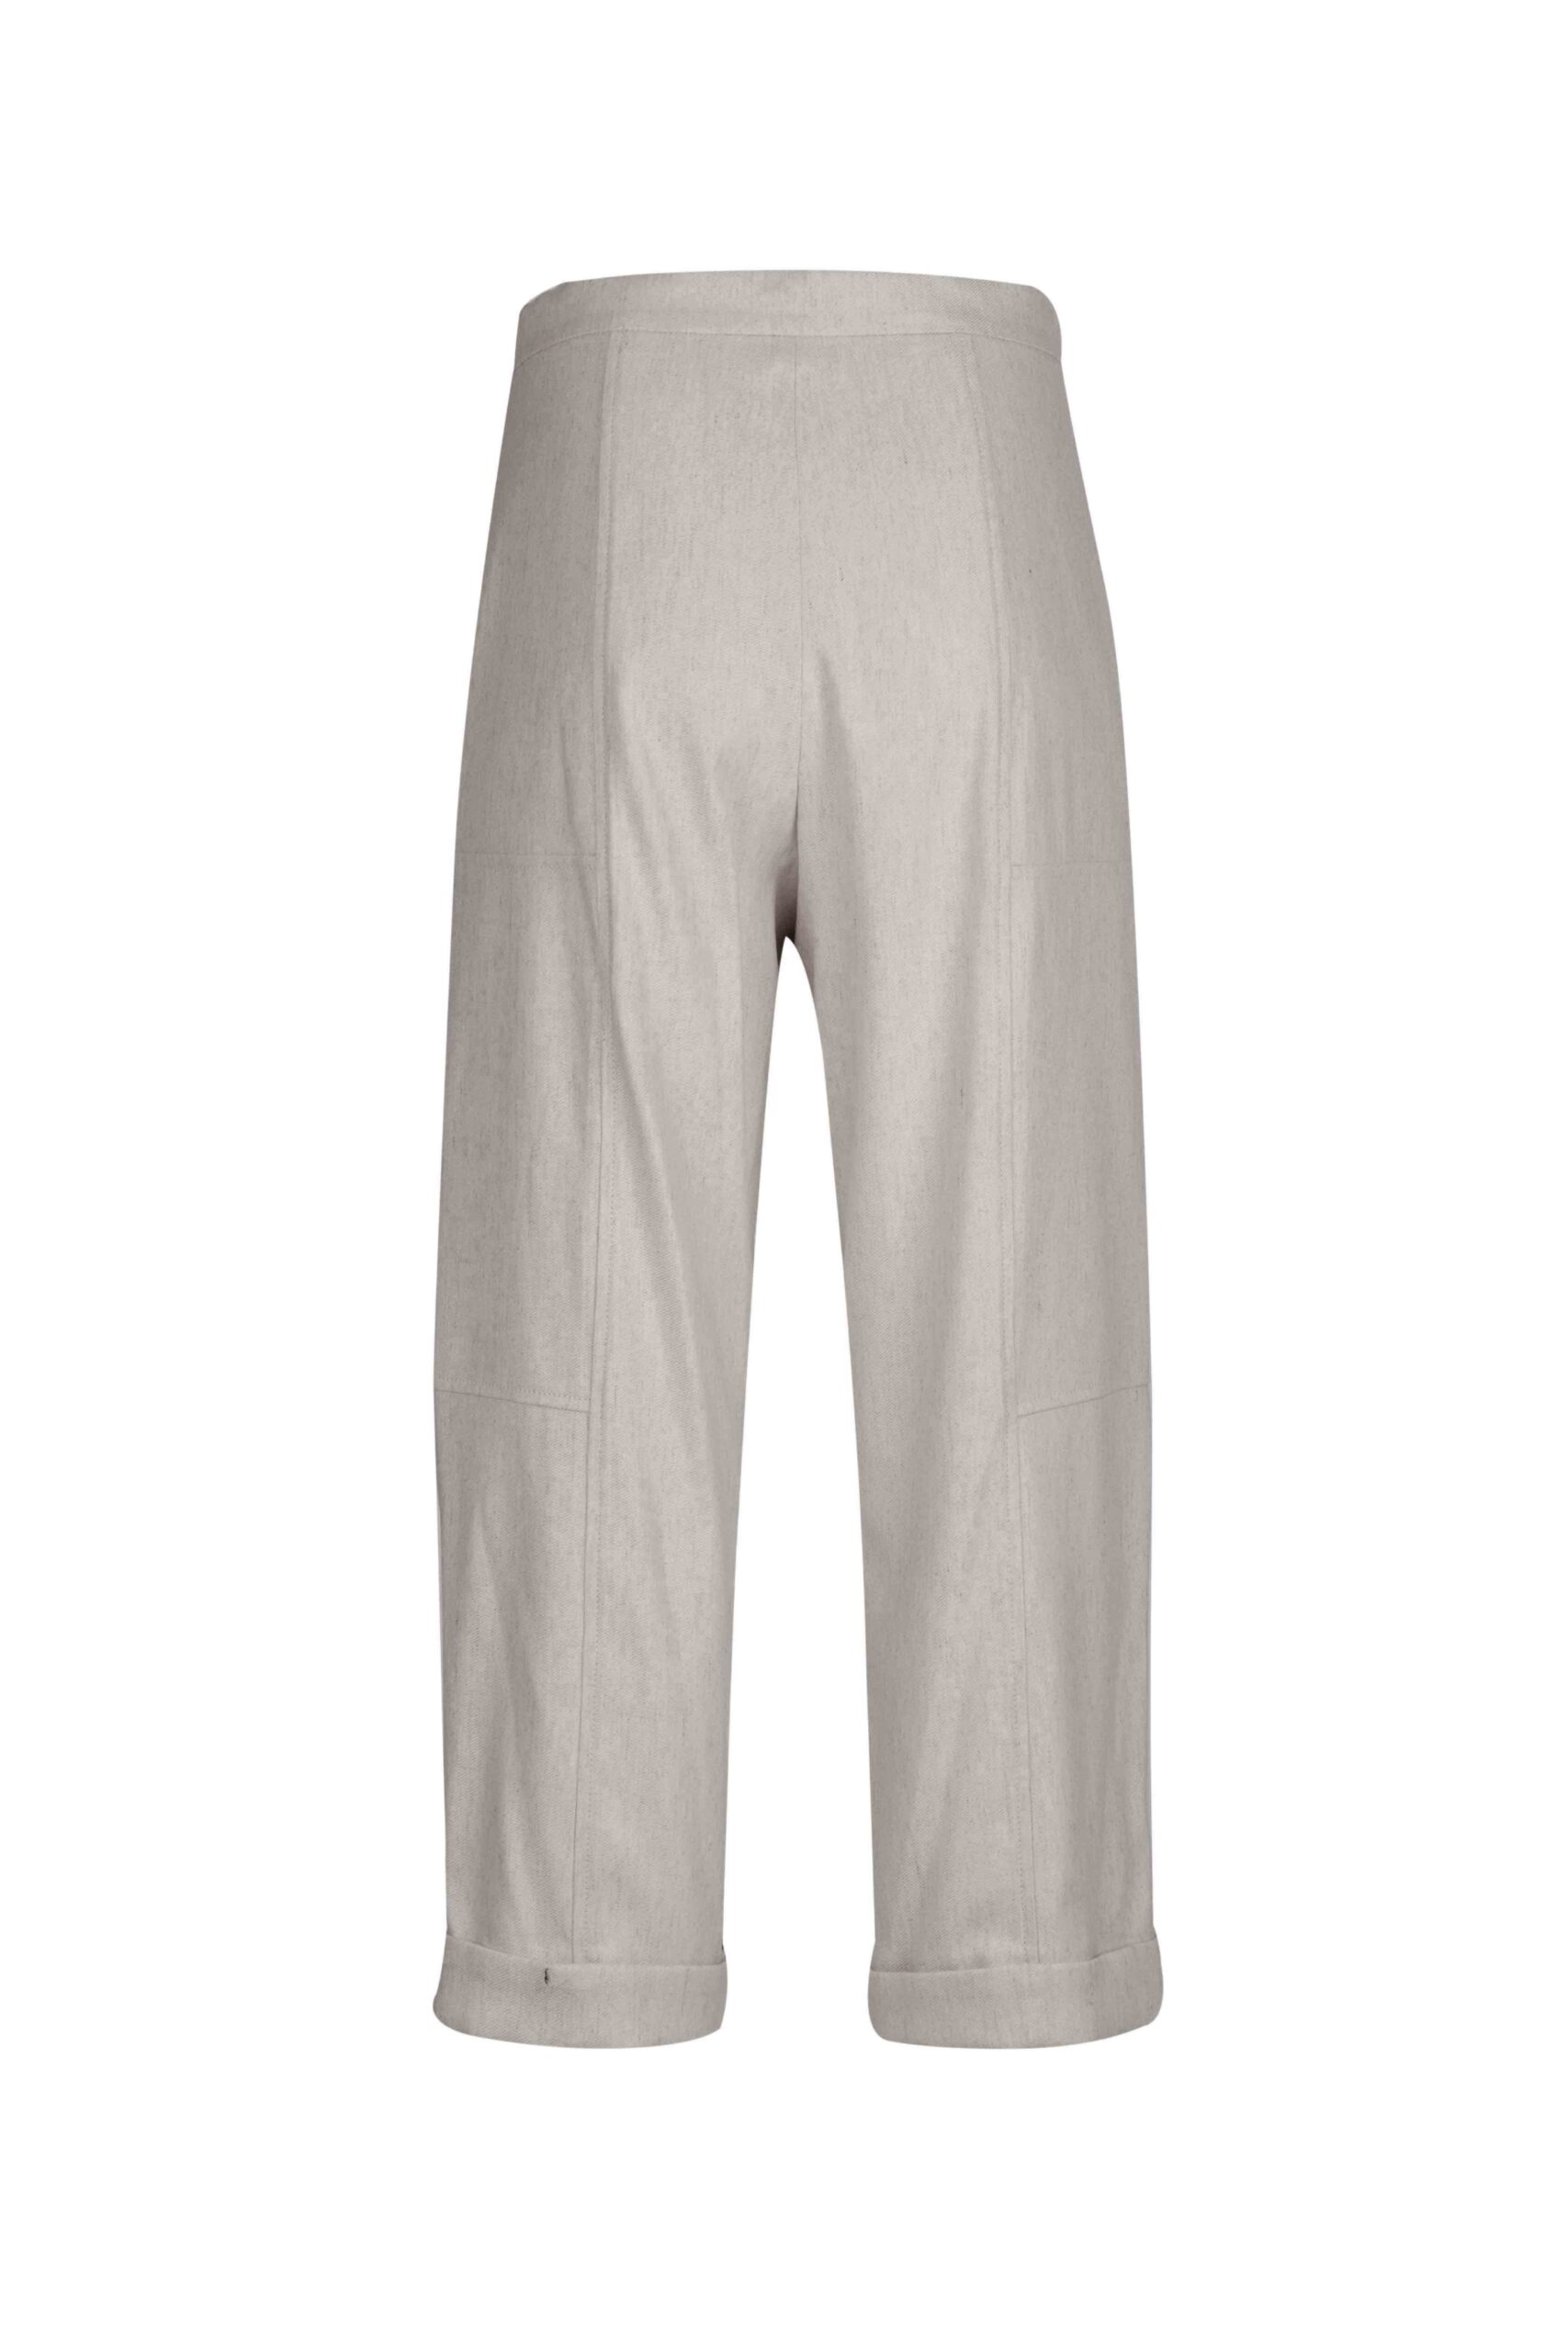 Wool Mix Utility Style Trousers with Turn Ups